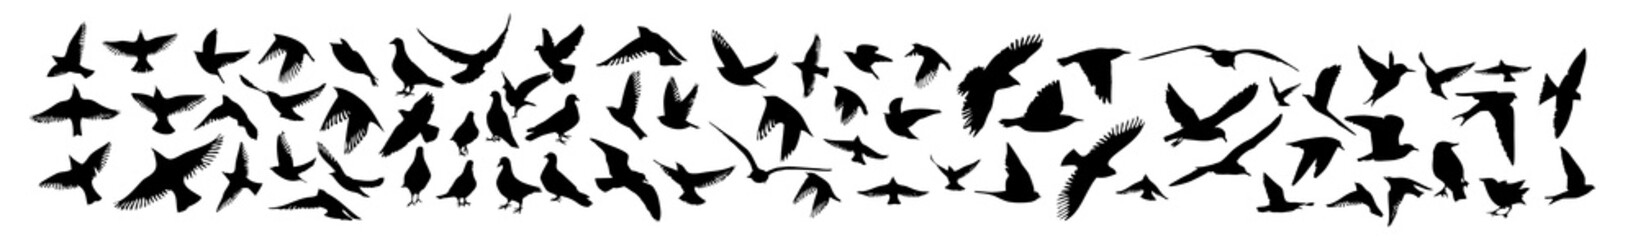 A set of different birds. Pigeon, starling, nightingale, hummingbird, eagle, raven, swift, seagull, swallow. Vector illustration